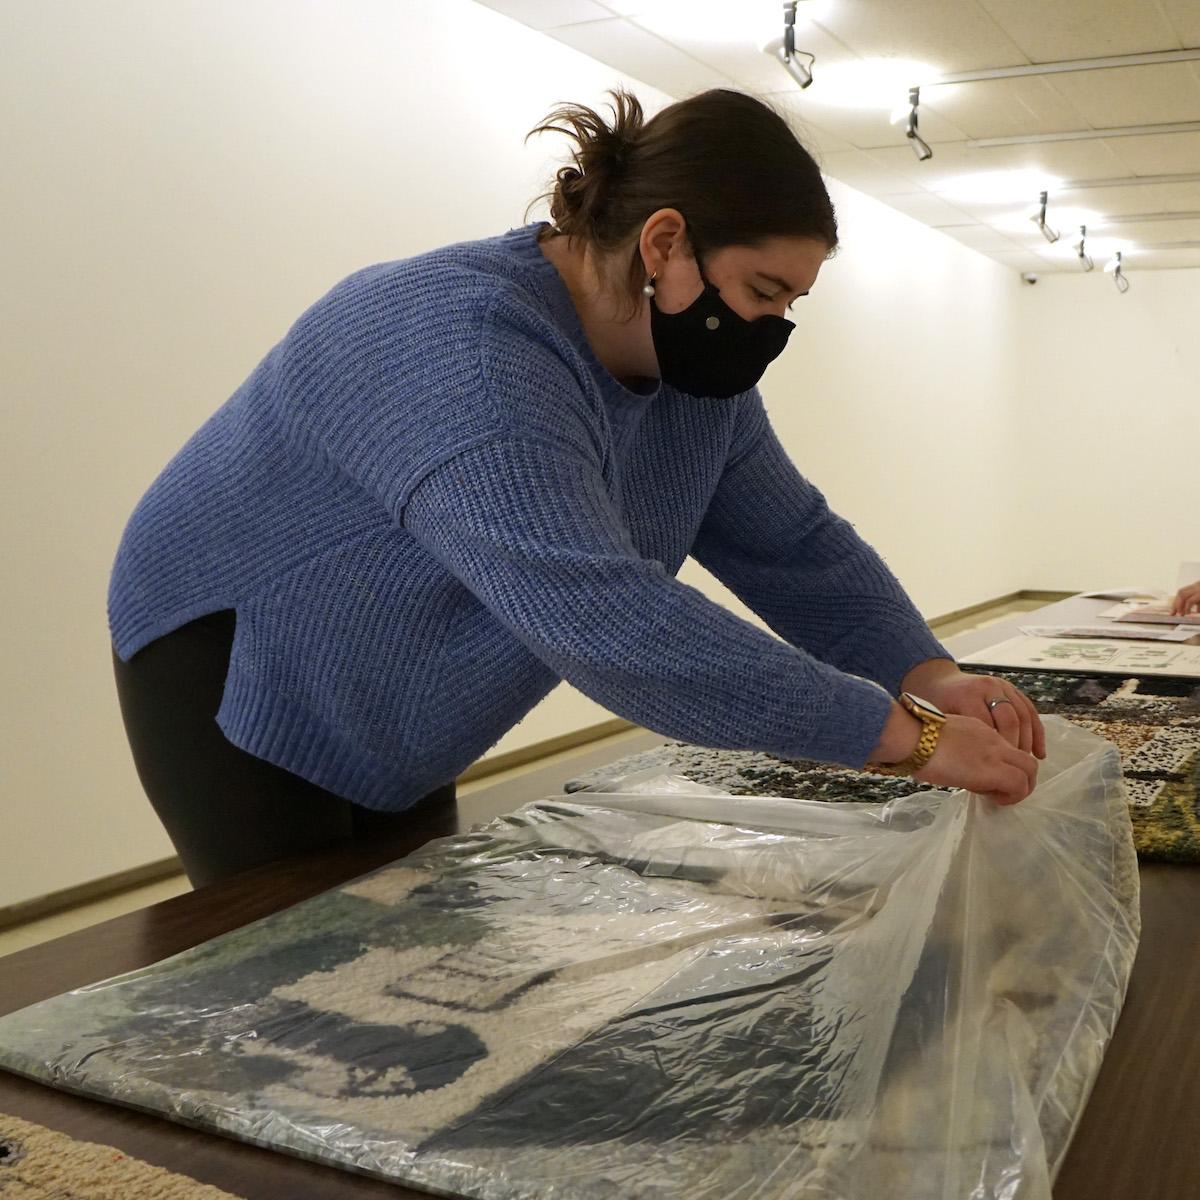 Paige leans over a table, unwrapping an artwork covered with thin plastic.